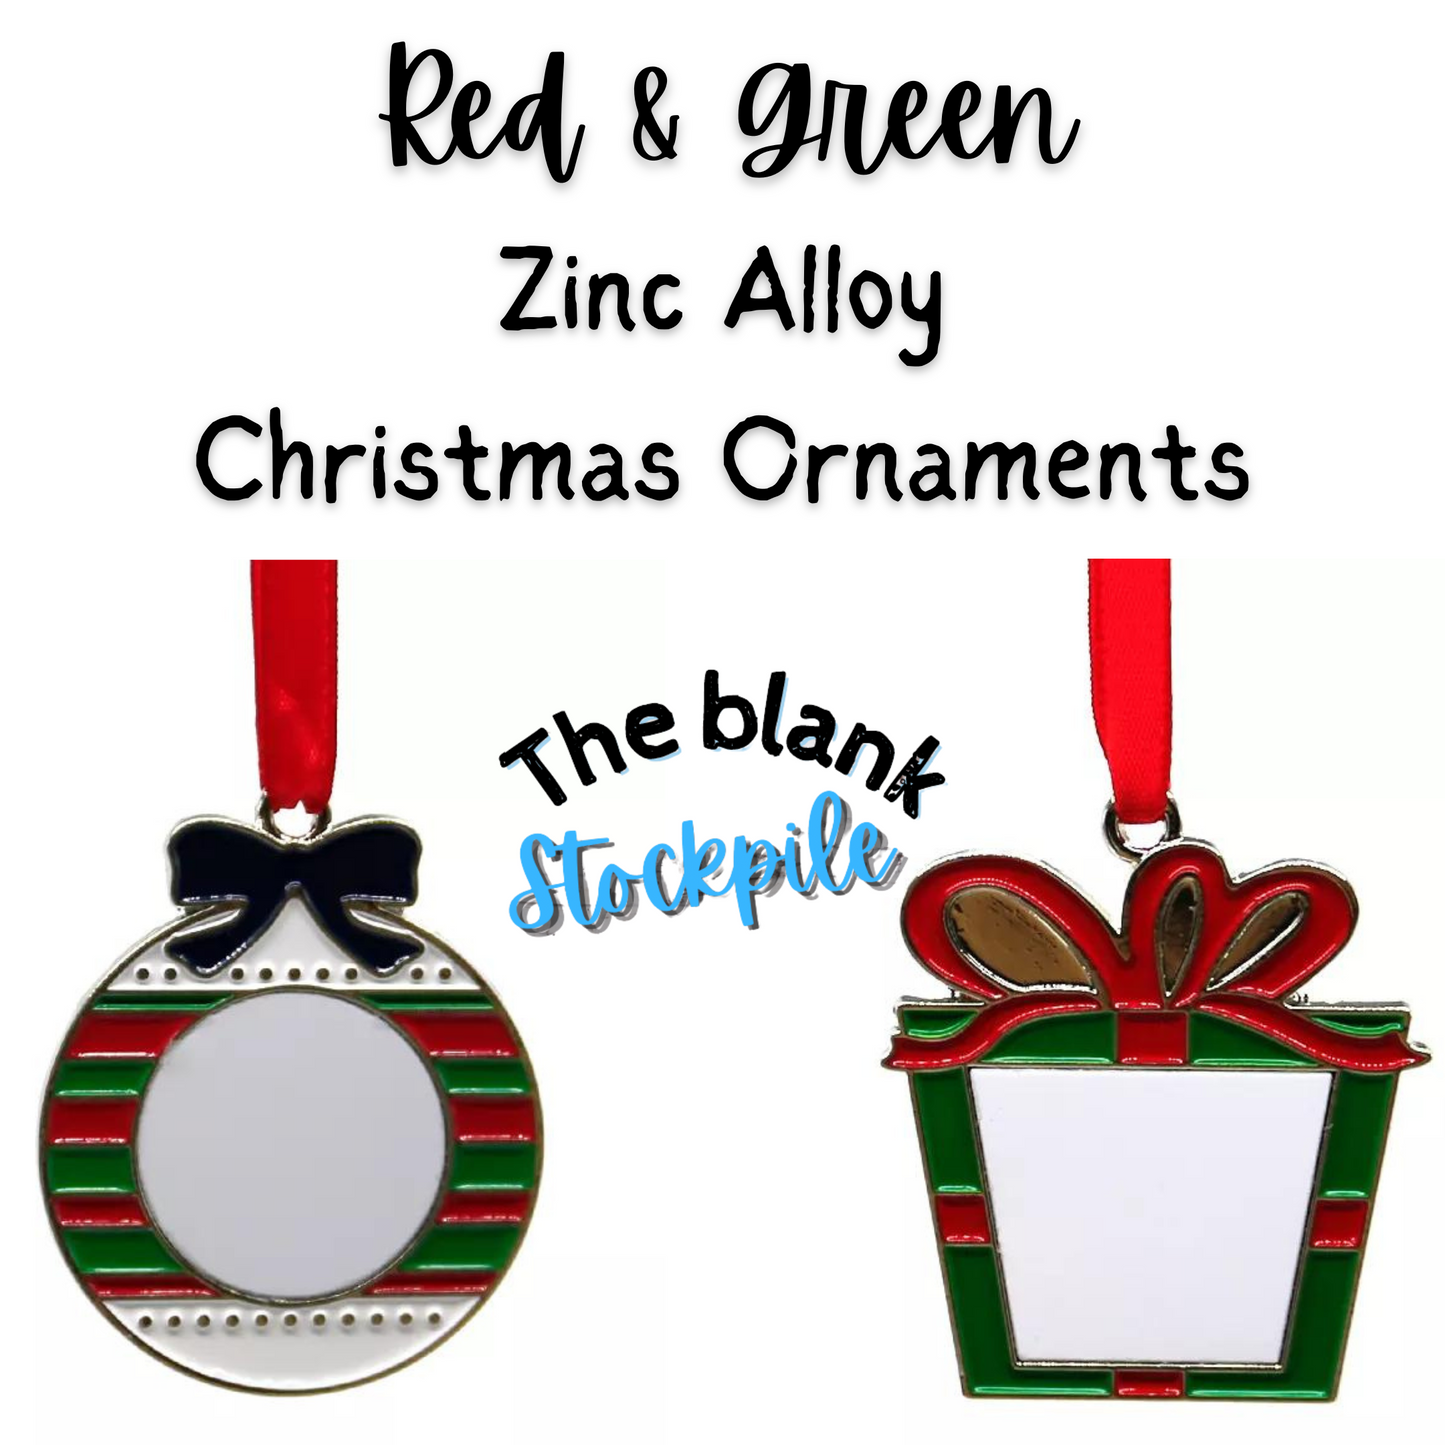 Blank Christmas Zinc Alloy Ornaments with Red & Green accents